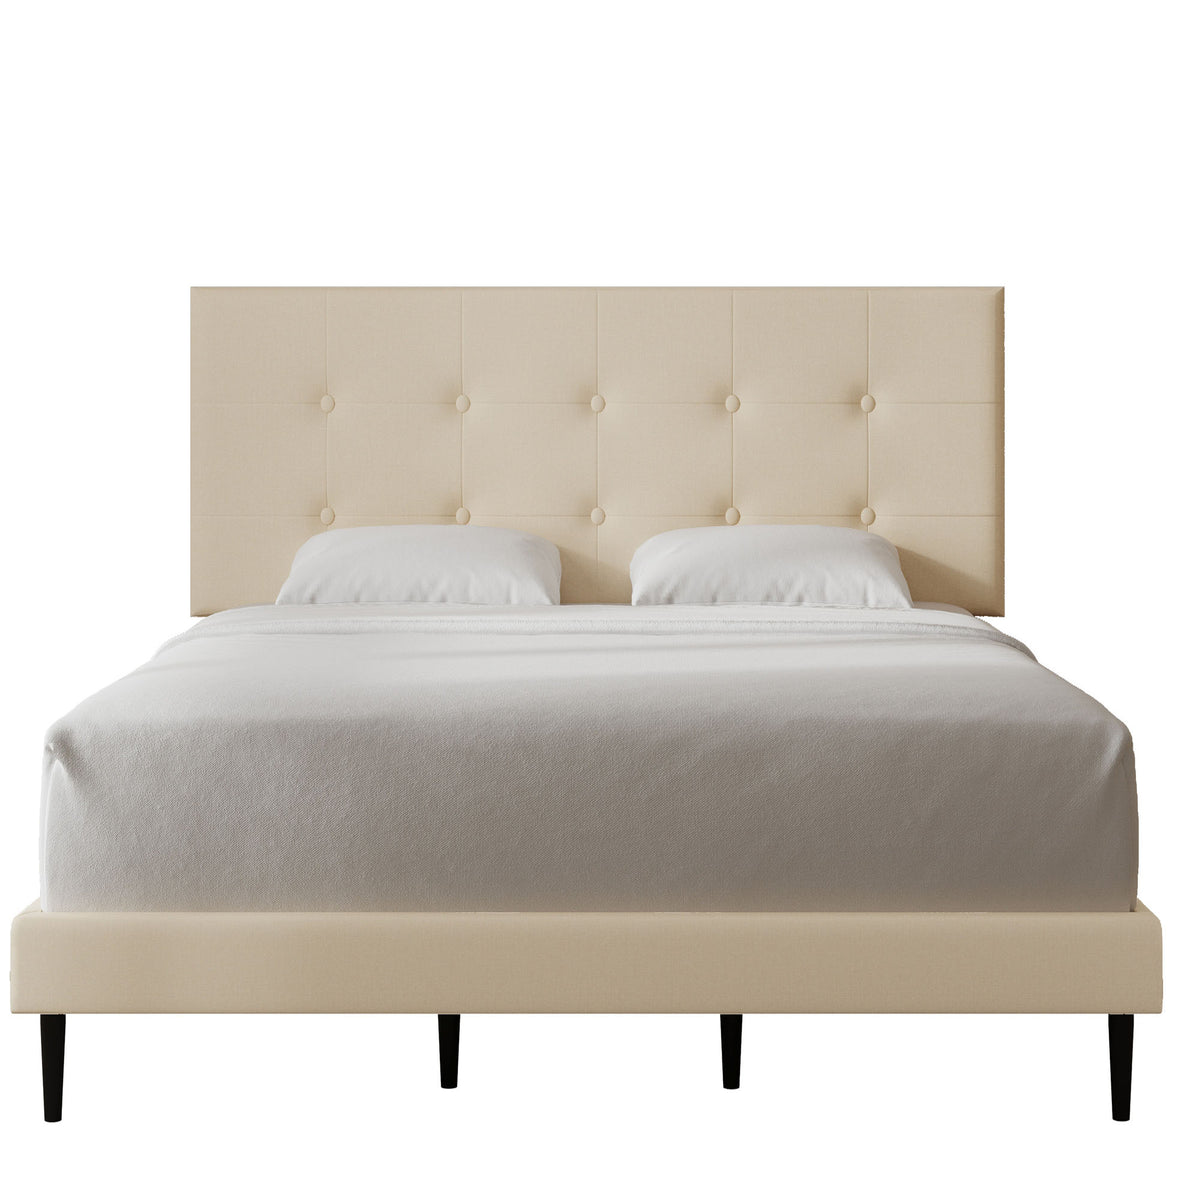 Velets Nora Contemporary Mid-Century Soft Padded Tufted Fabric Upholstered Low-profile Platform Bed with Adjustable Headboard - Solid Wood Frame Construction, Wood Slat System - Beige